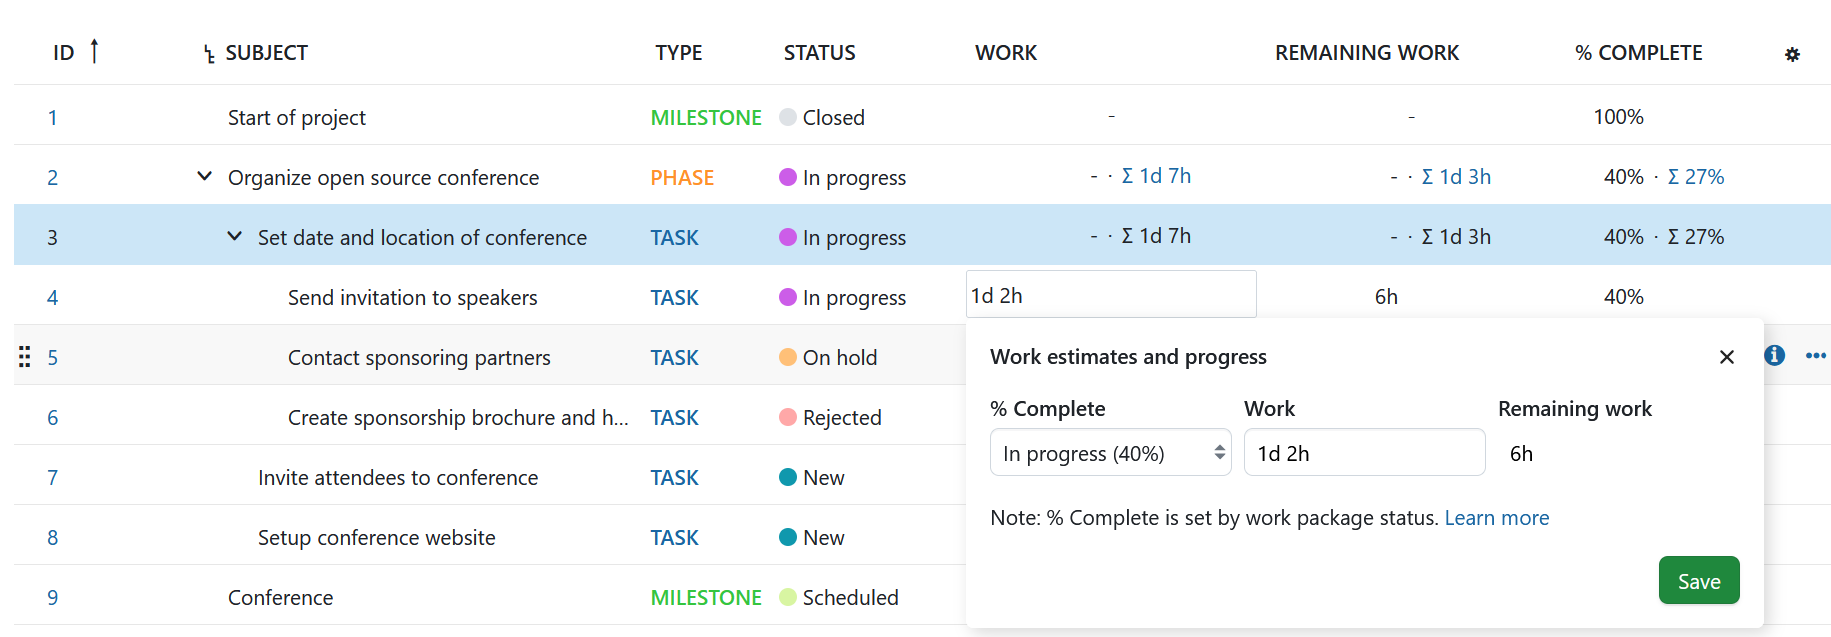 Work estimates and progress pop-over with status-based progress reporting